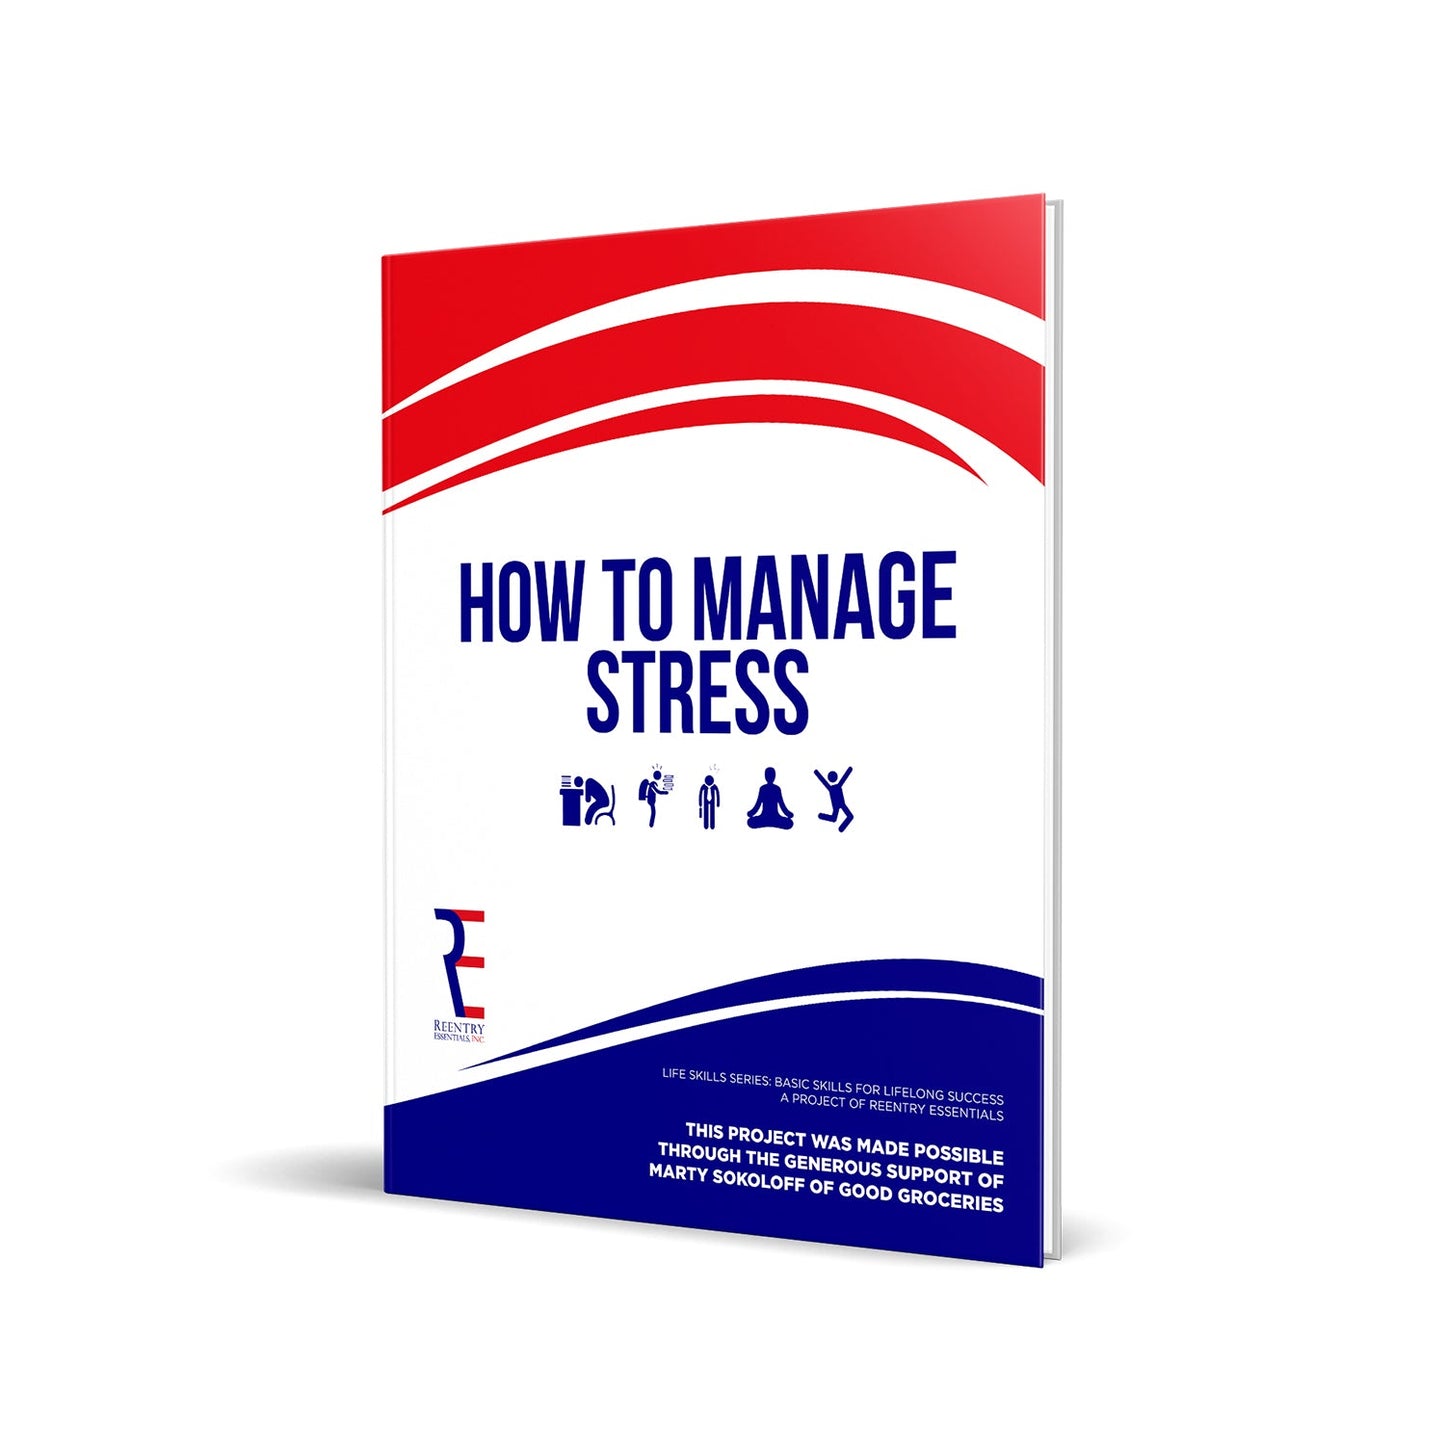 LSS - HOW TO MANAGE STRESS